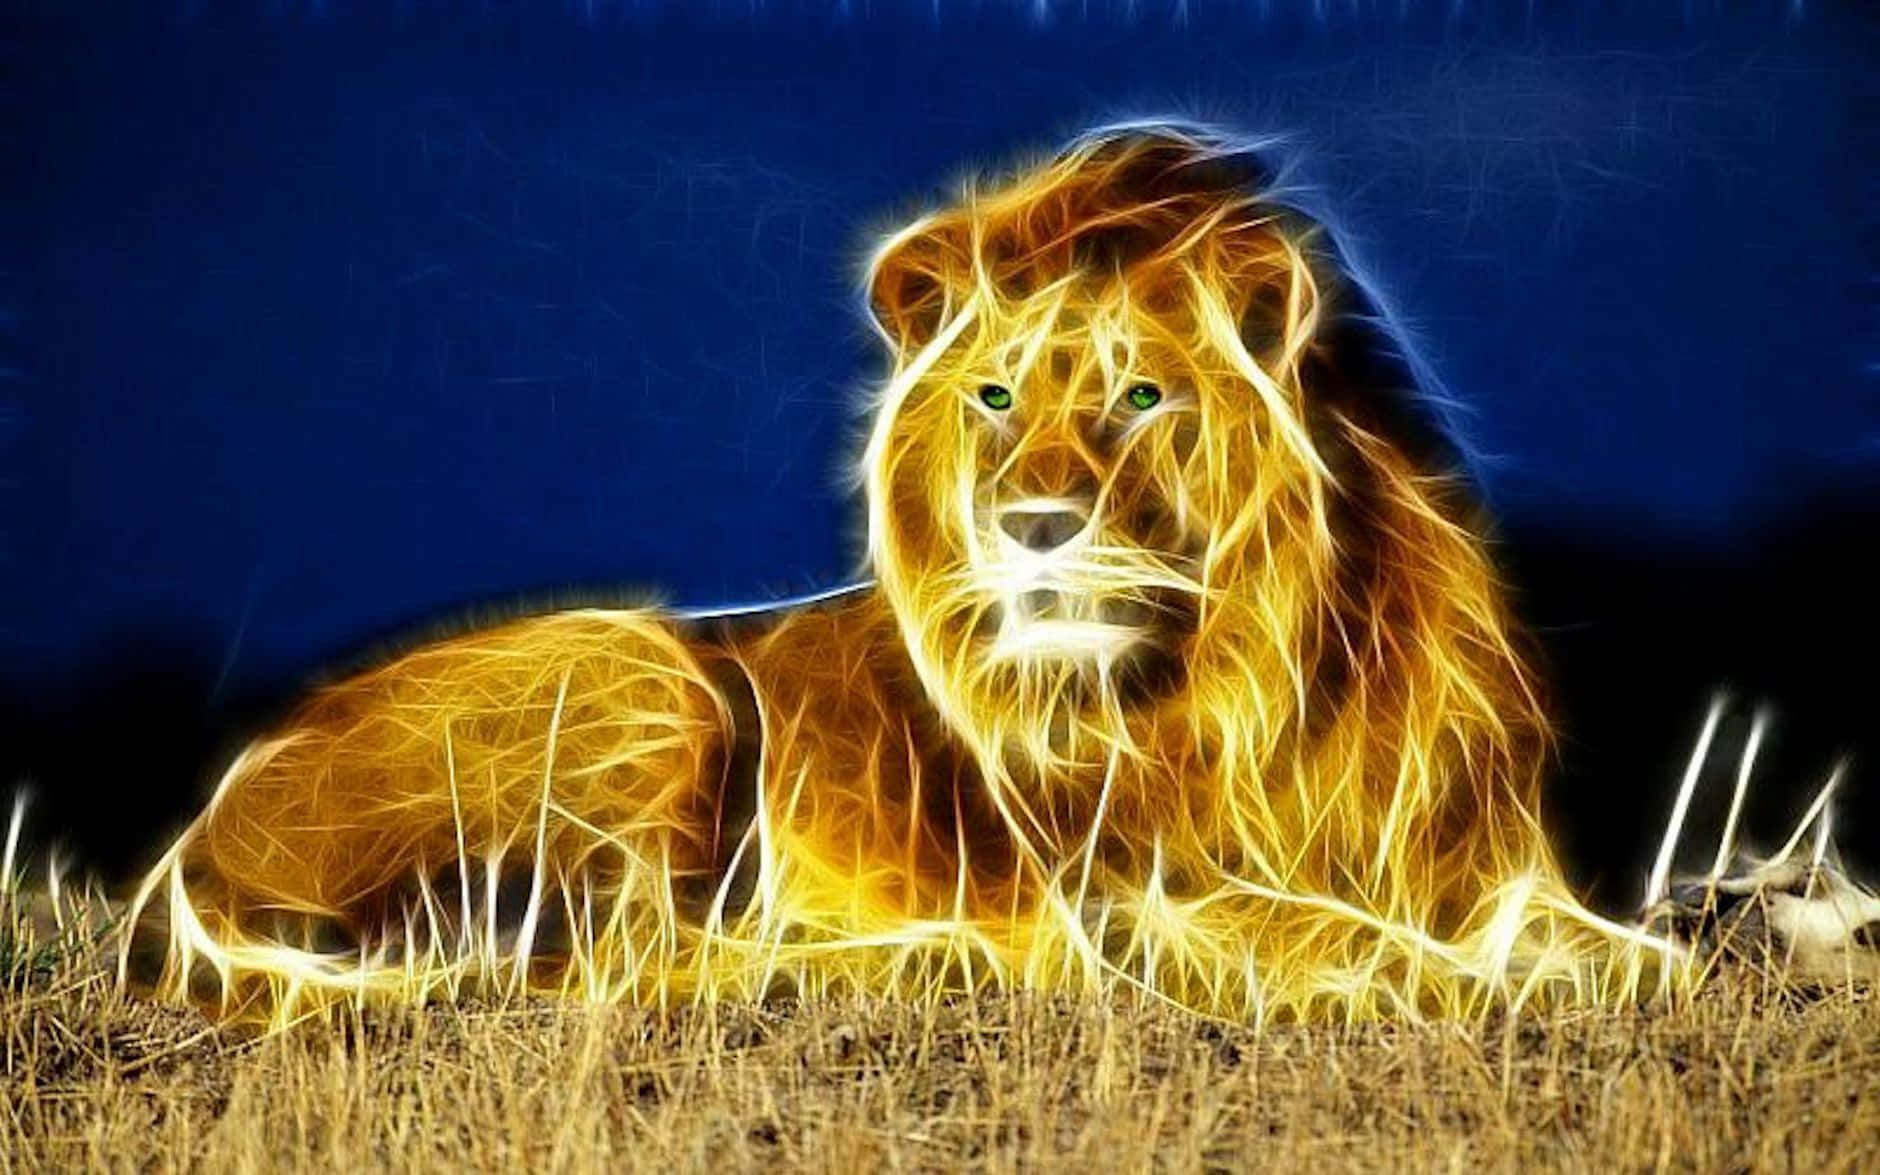 "The Abstract Lion" Wallpaper